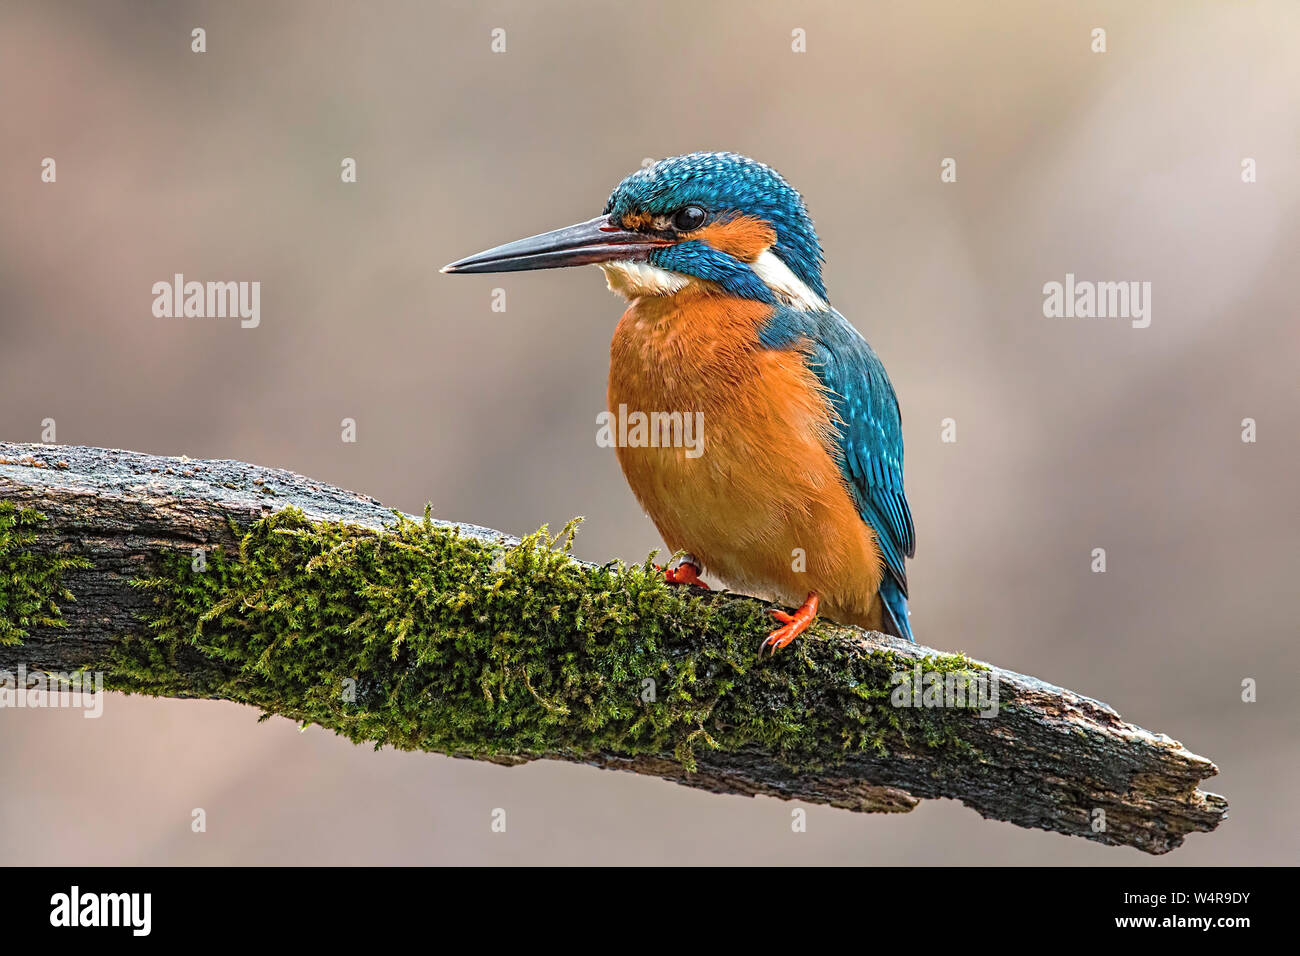 Common kingfisher sitting on the bought in the summer with blurred background. Stock Photo